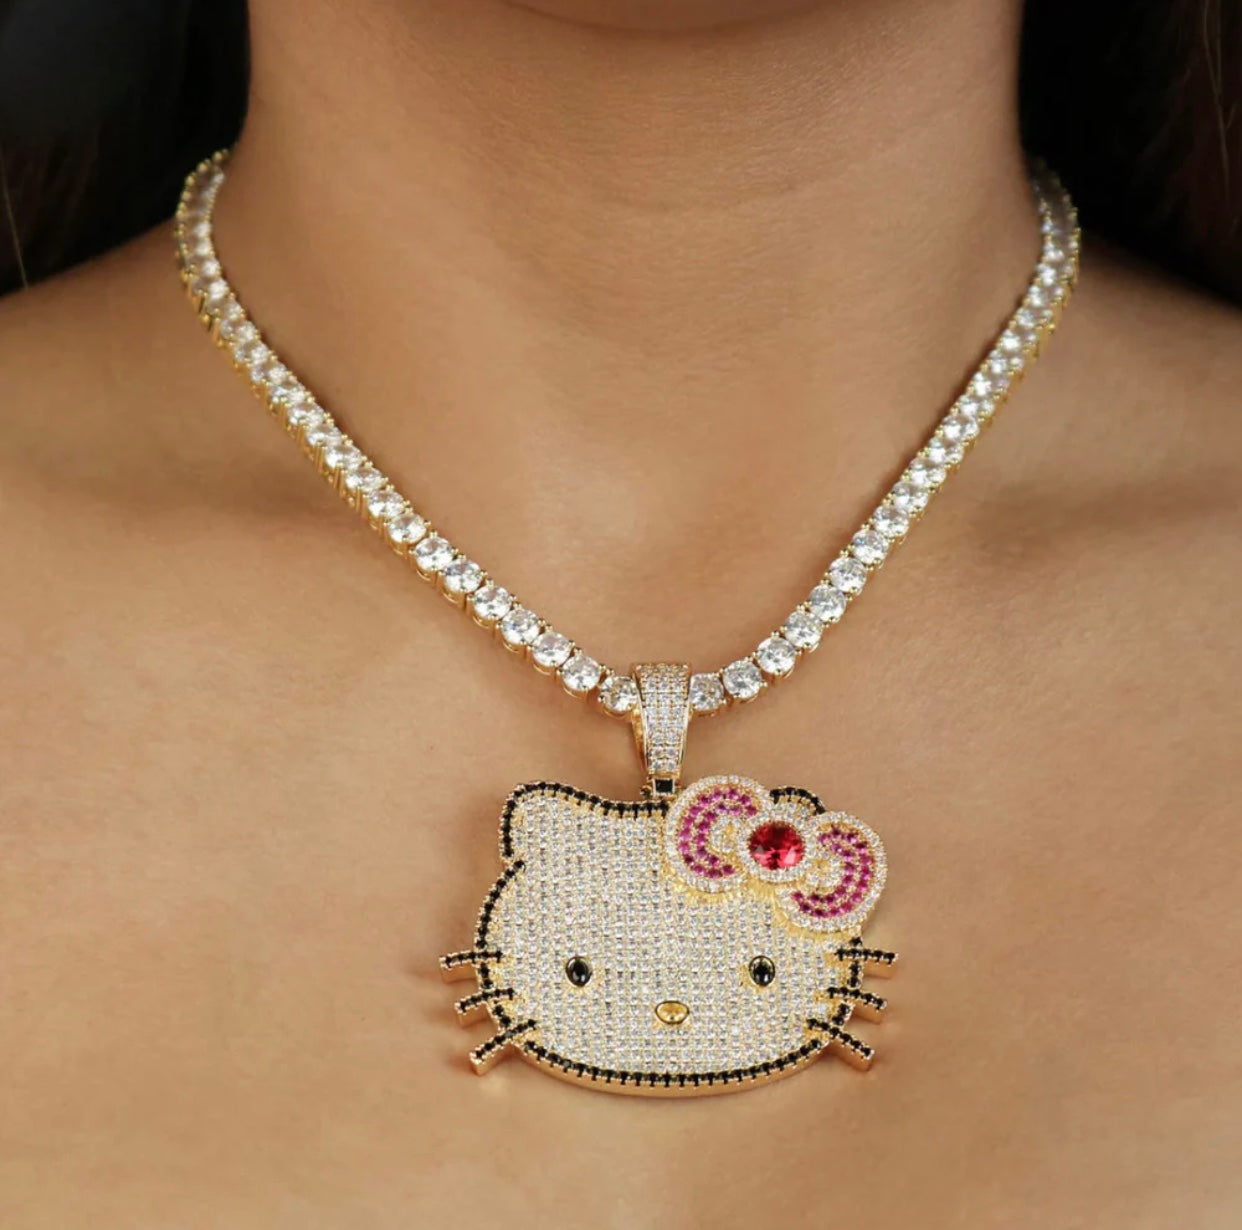 Hello Kitty Necklace - Holding Heart | Items By Mel, Inc.